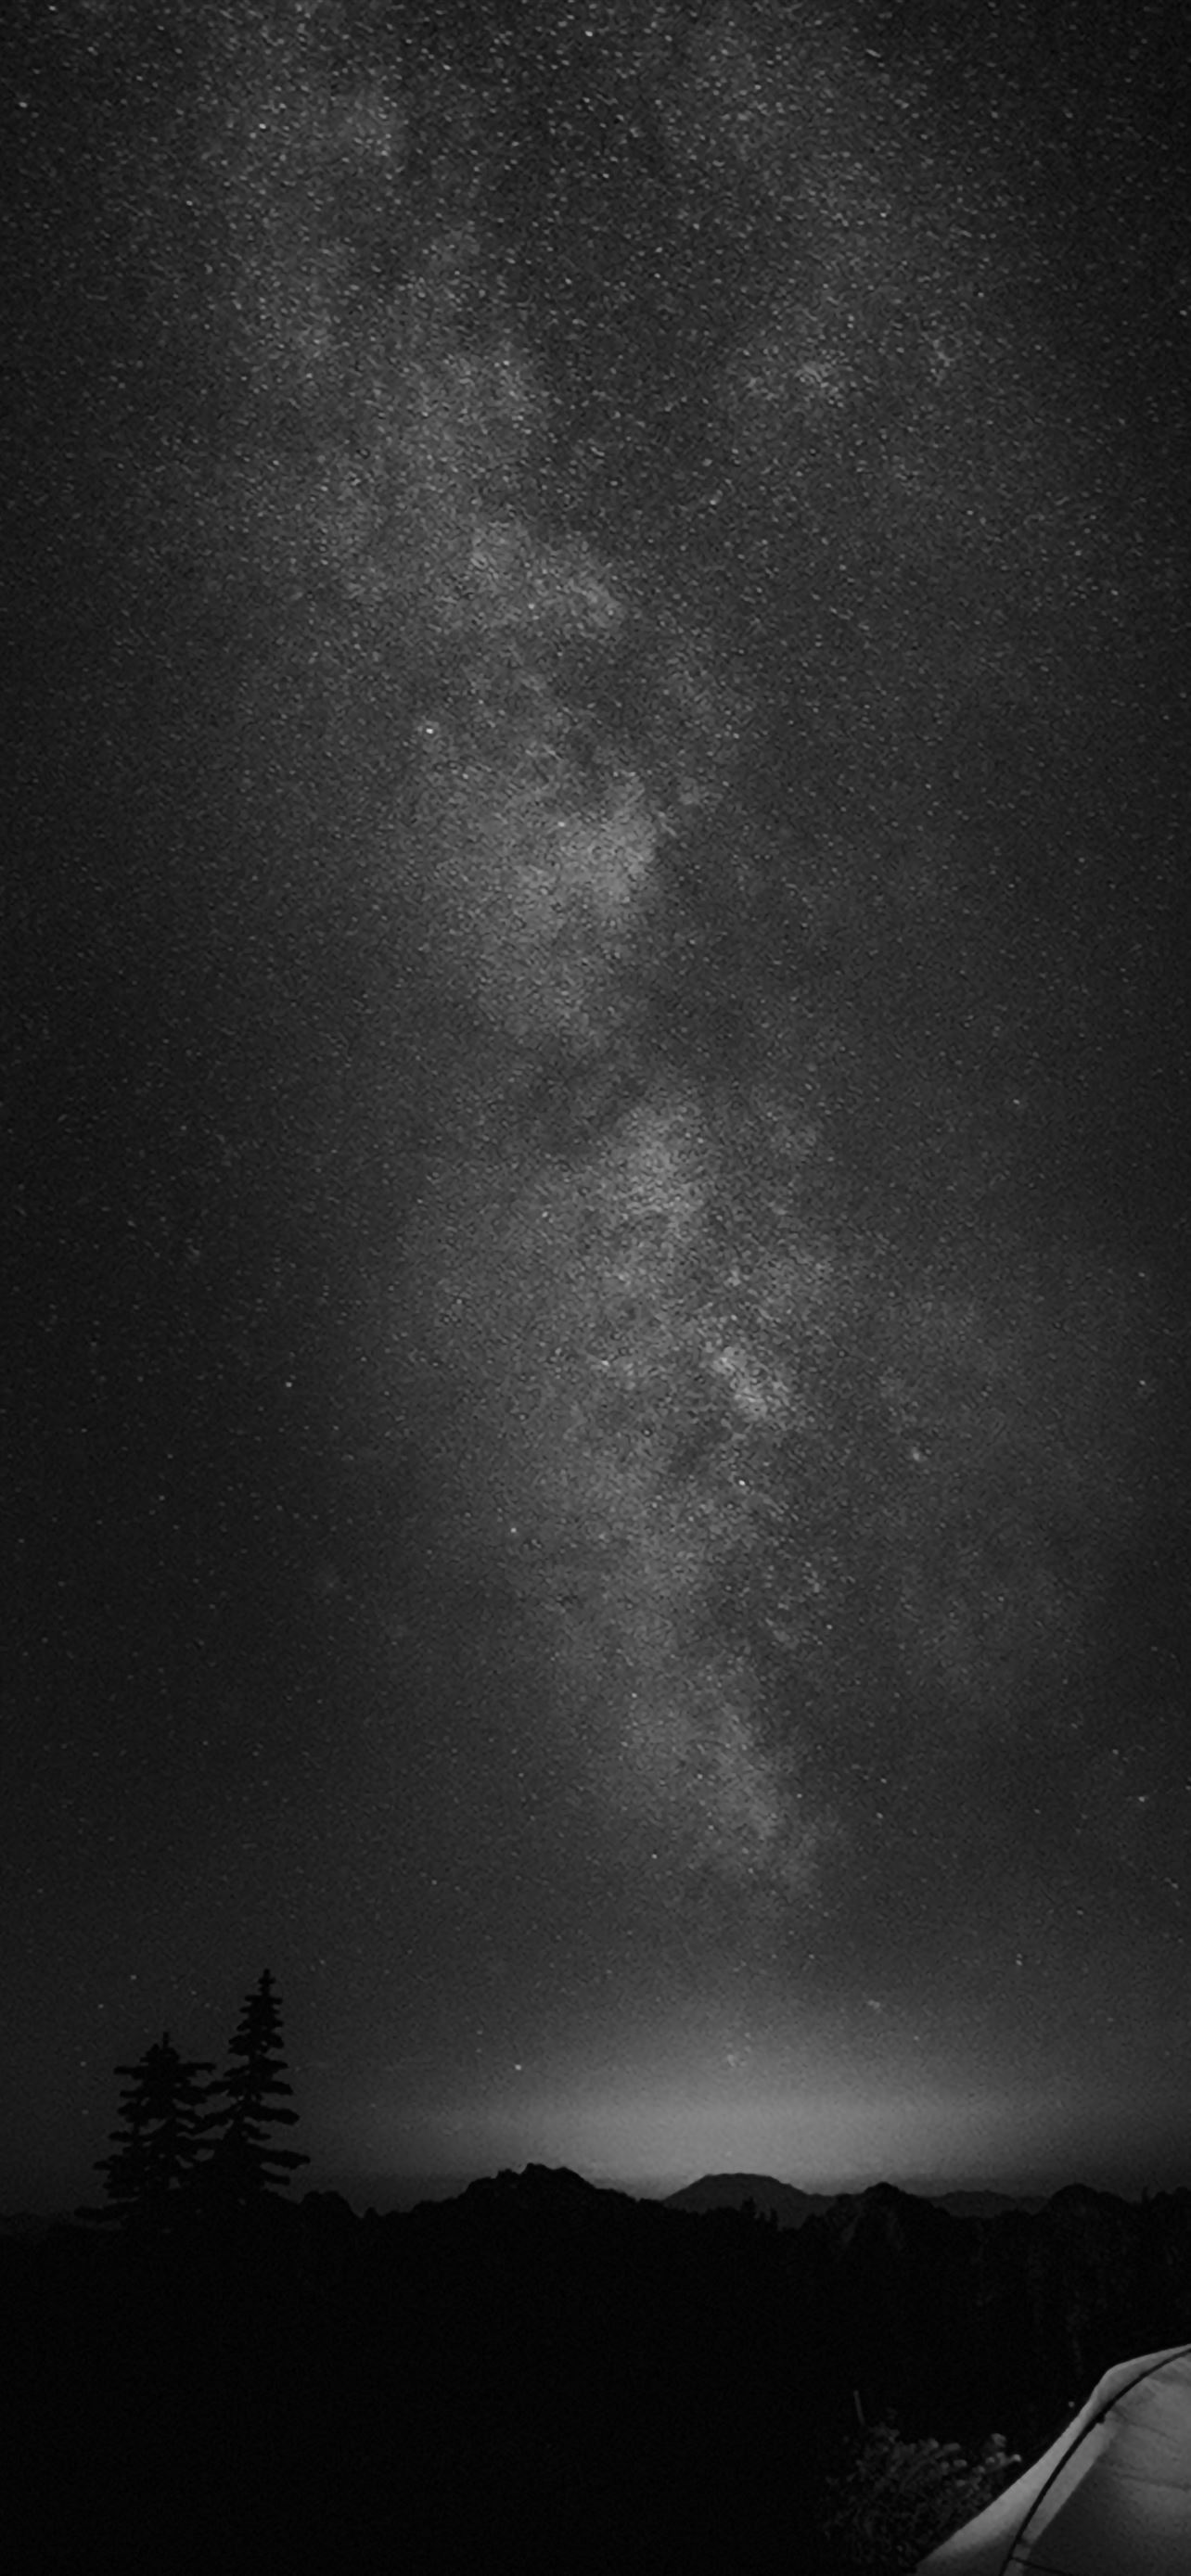 1000 Dark Space Pictures  Download Free Images on Unsplash